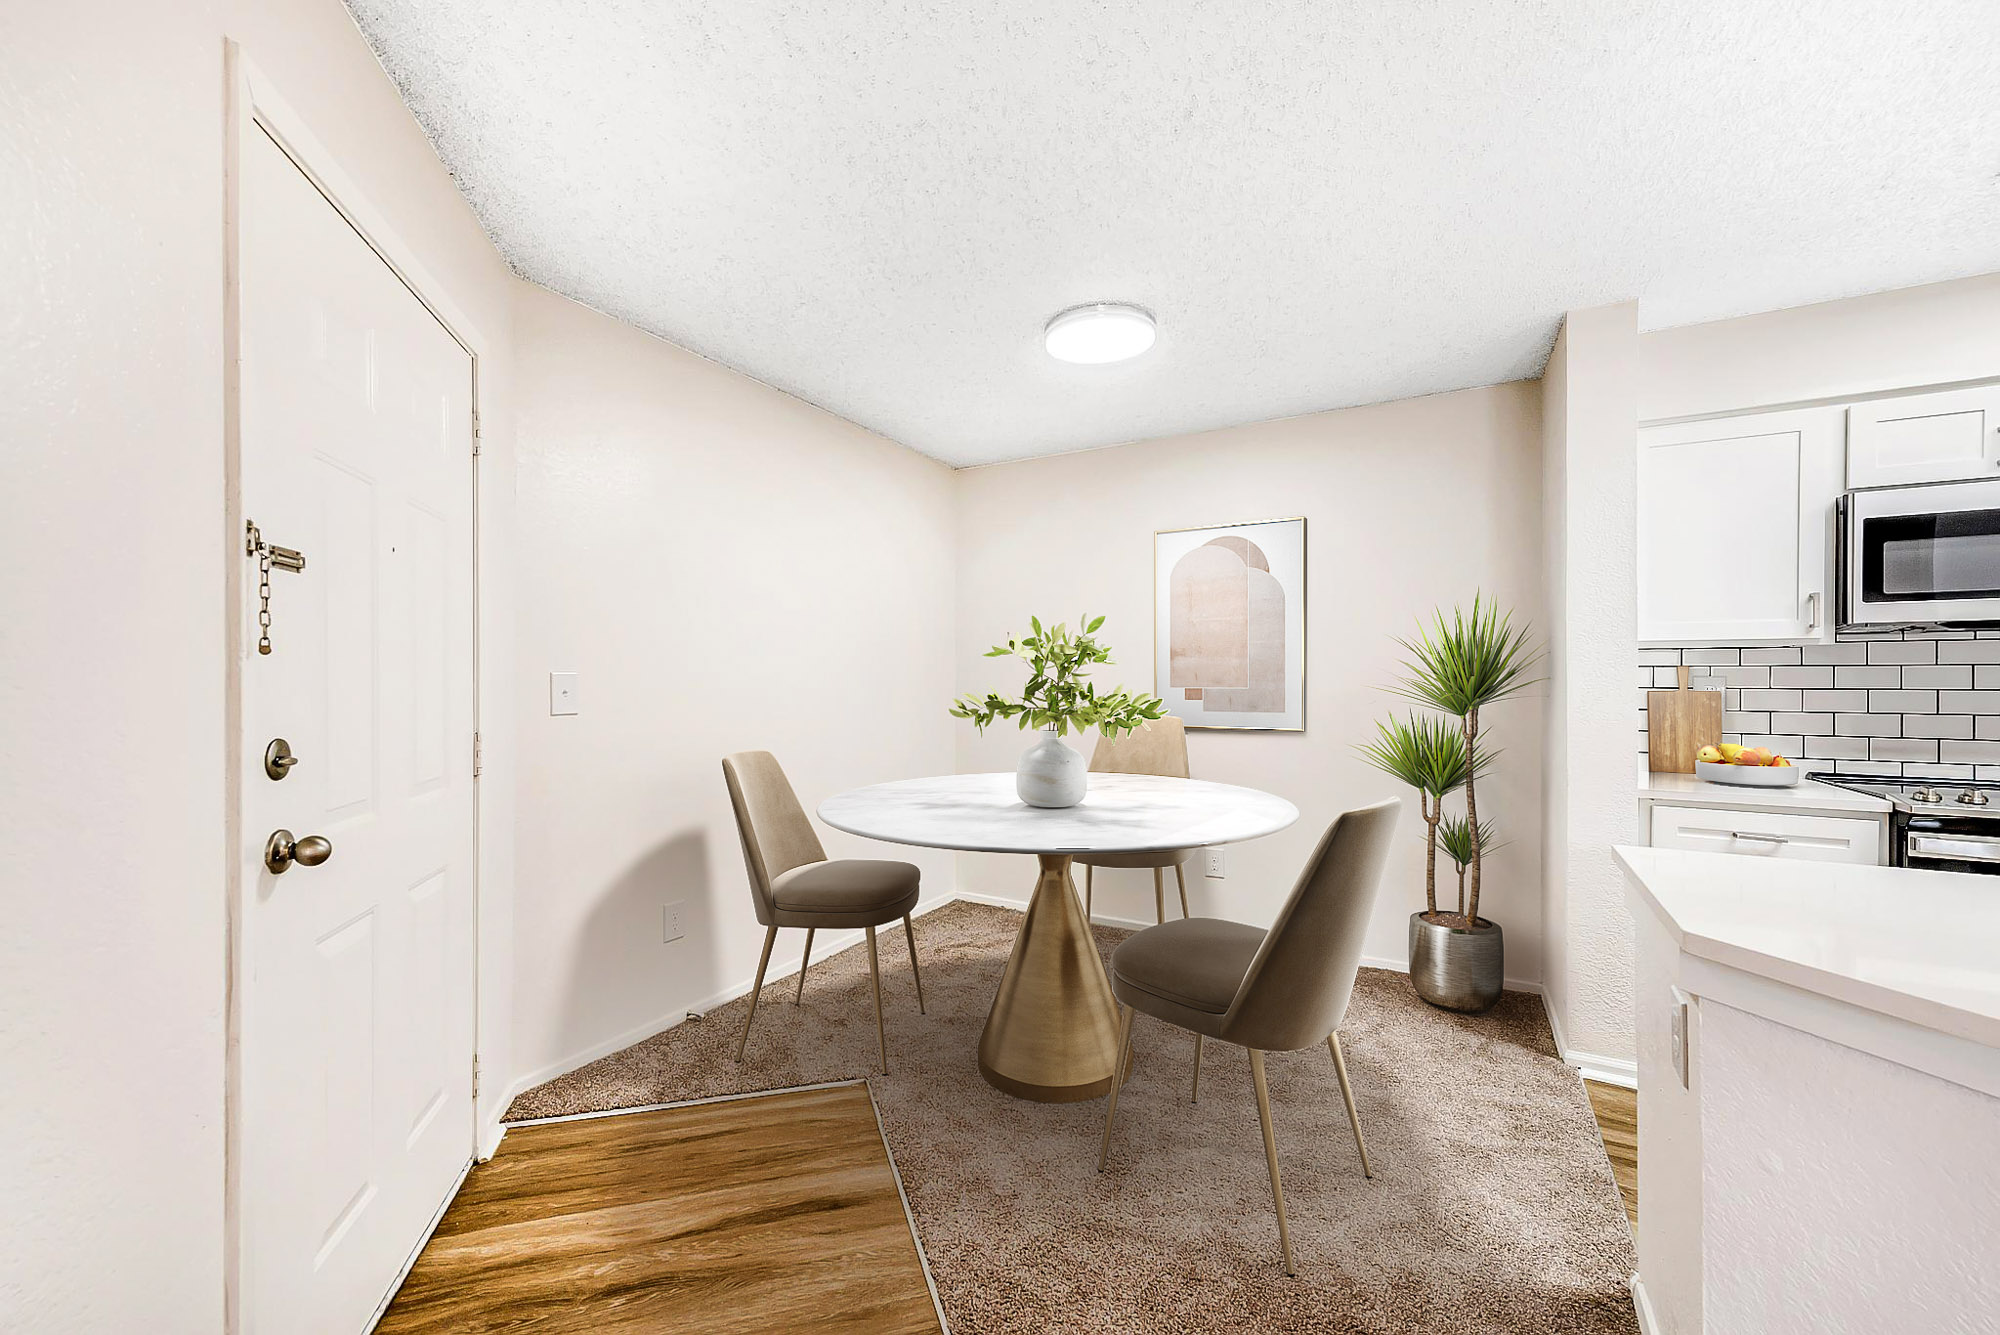 A dining area at Canyon Chase apartments in Westminster, CO.